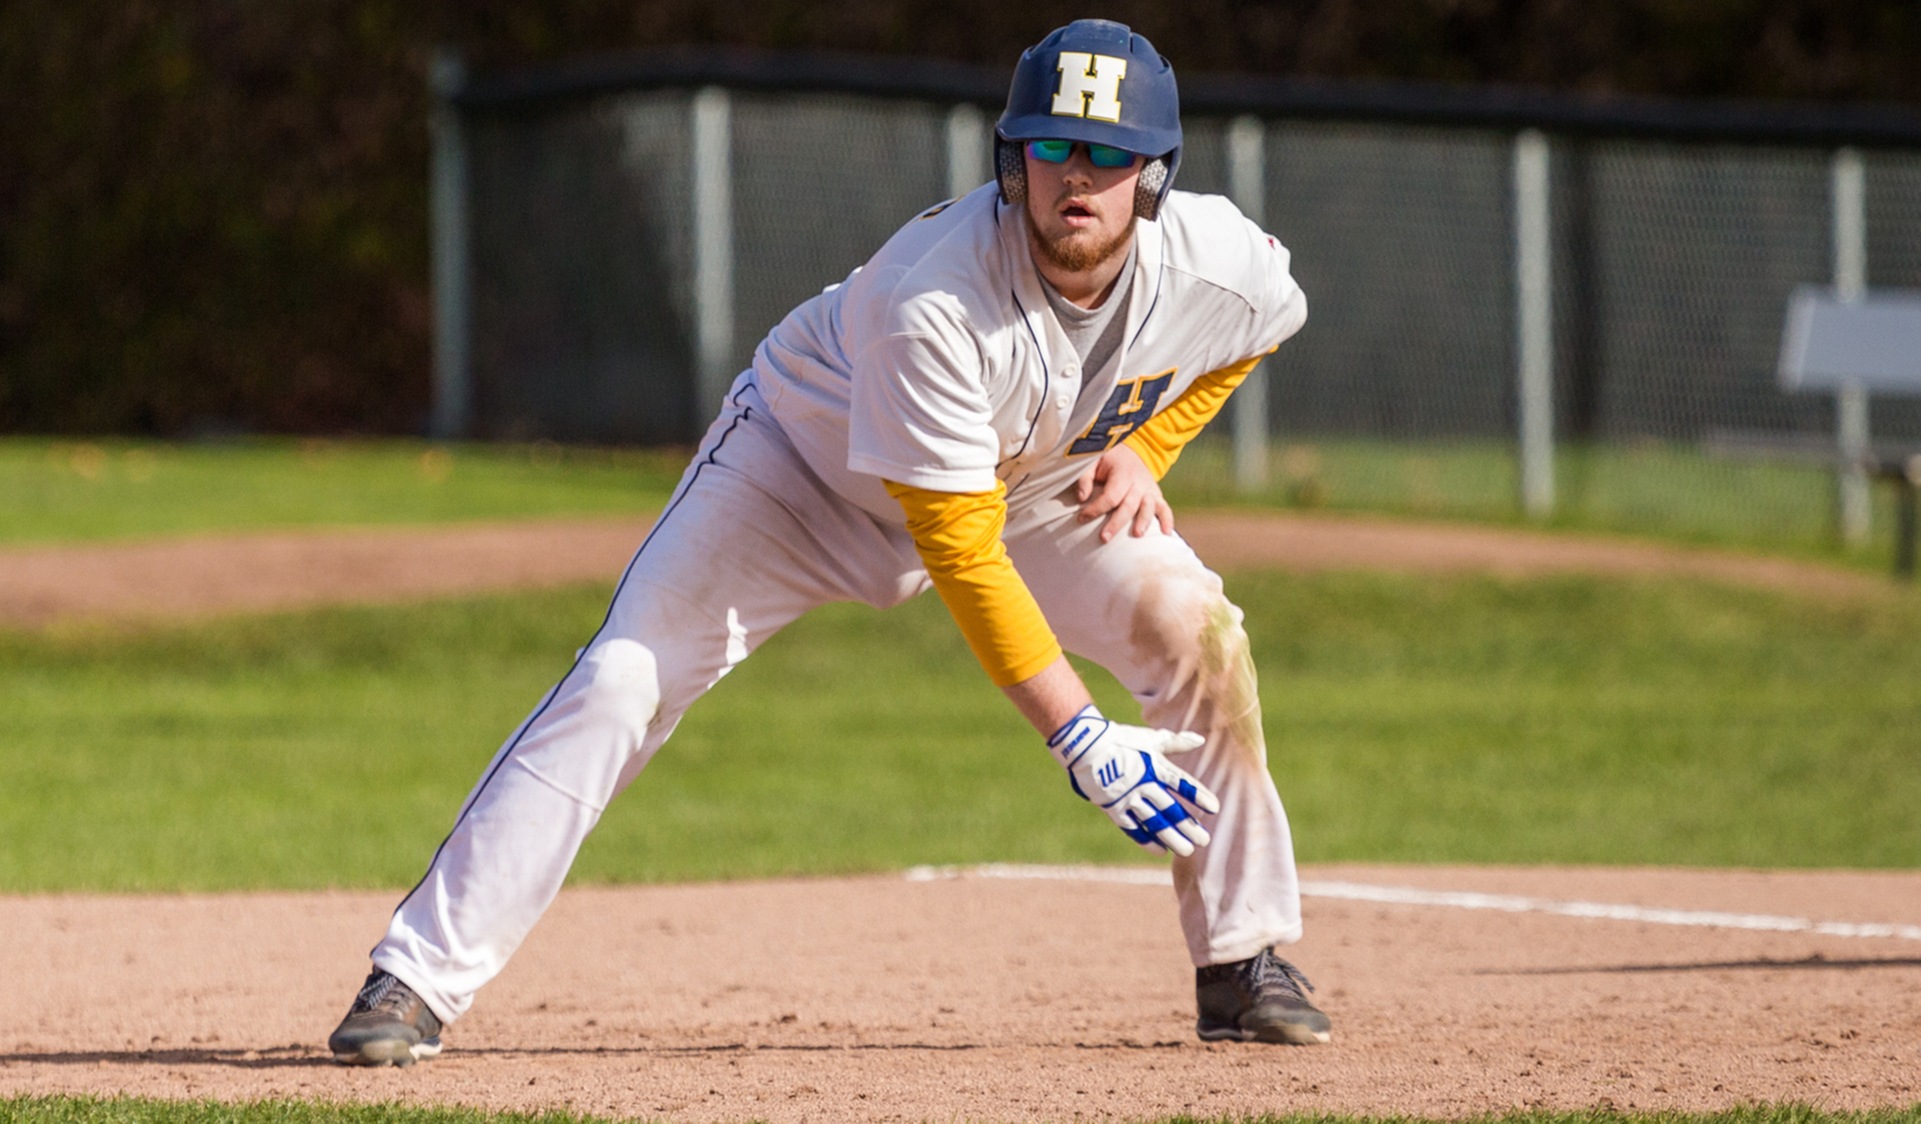 Humber Baseball's Pre-Season Schedule Starts With Trip To Montréal